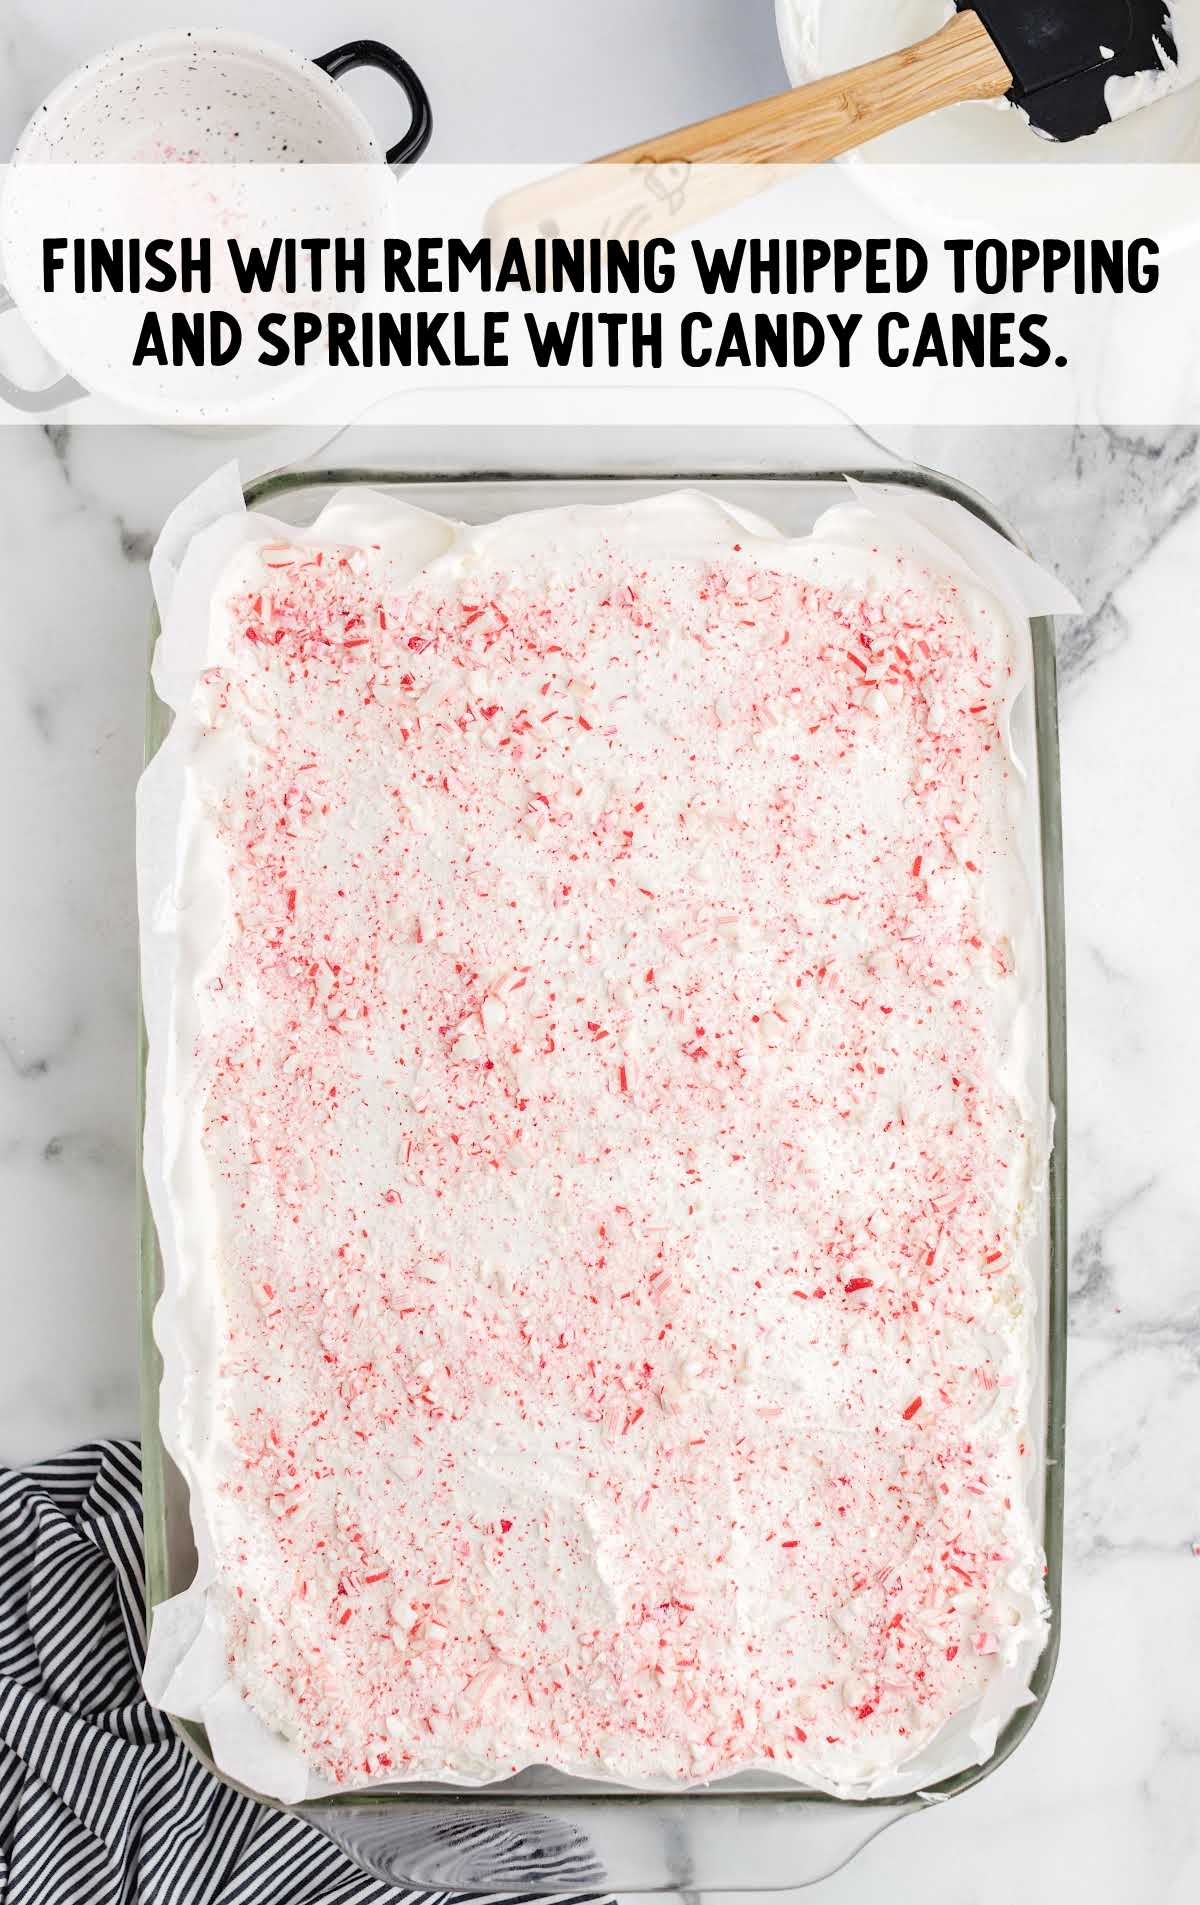 whipped topping and candy canes topped on top of the dessert